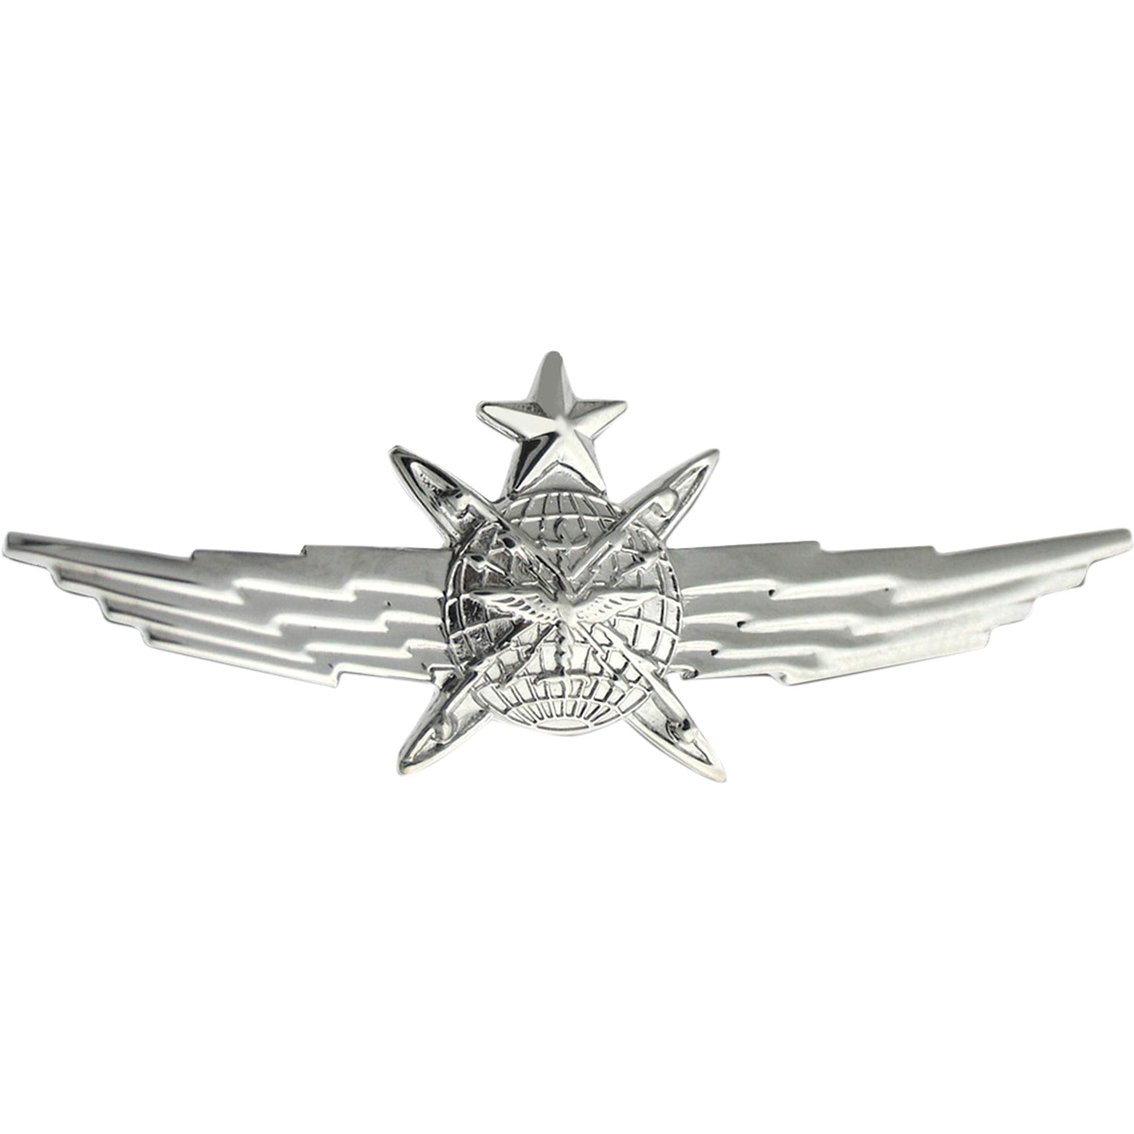 US AIR FORCE SENIOR CYBERSPACE SUPPORT PIN REGULATION SIZE INTERNET MILLITARY 